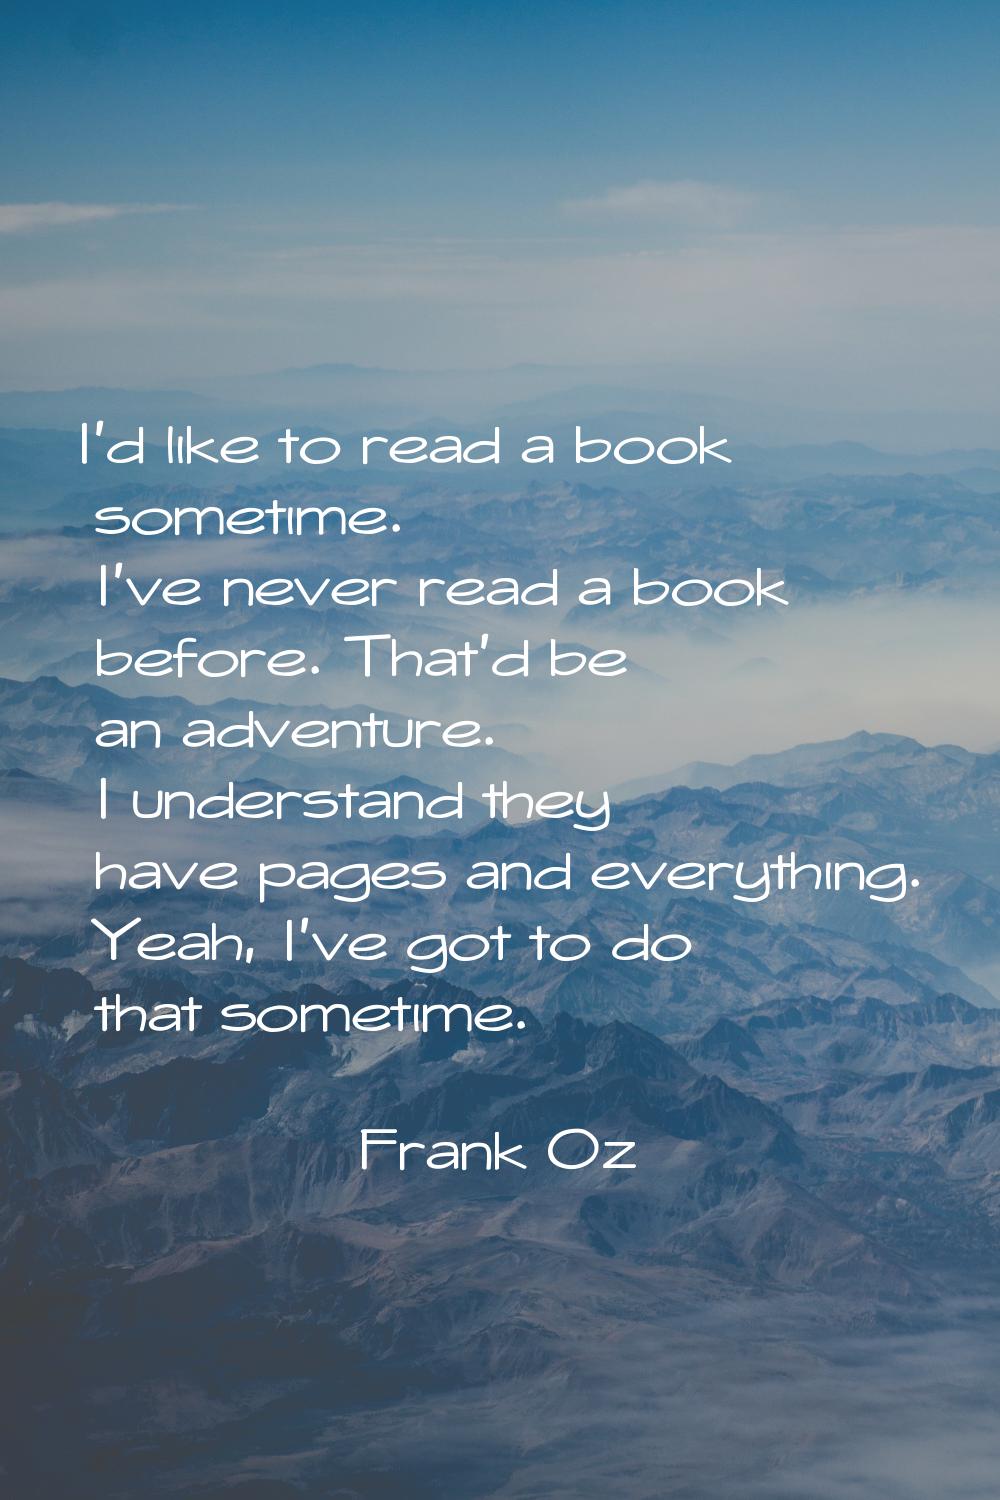 I'd like to read a book sometime. I've never read a book before. That'd be an adventure. I understa